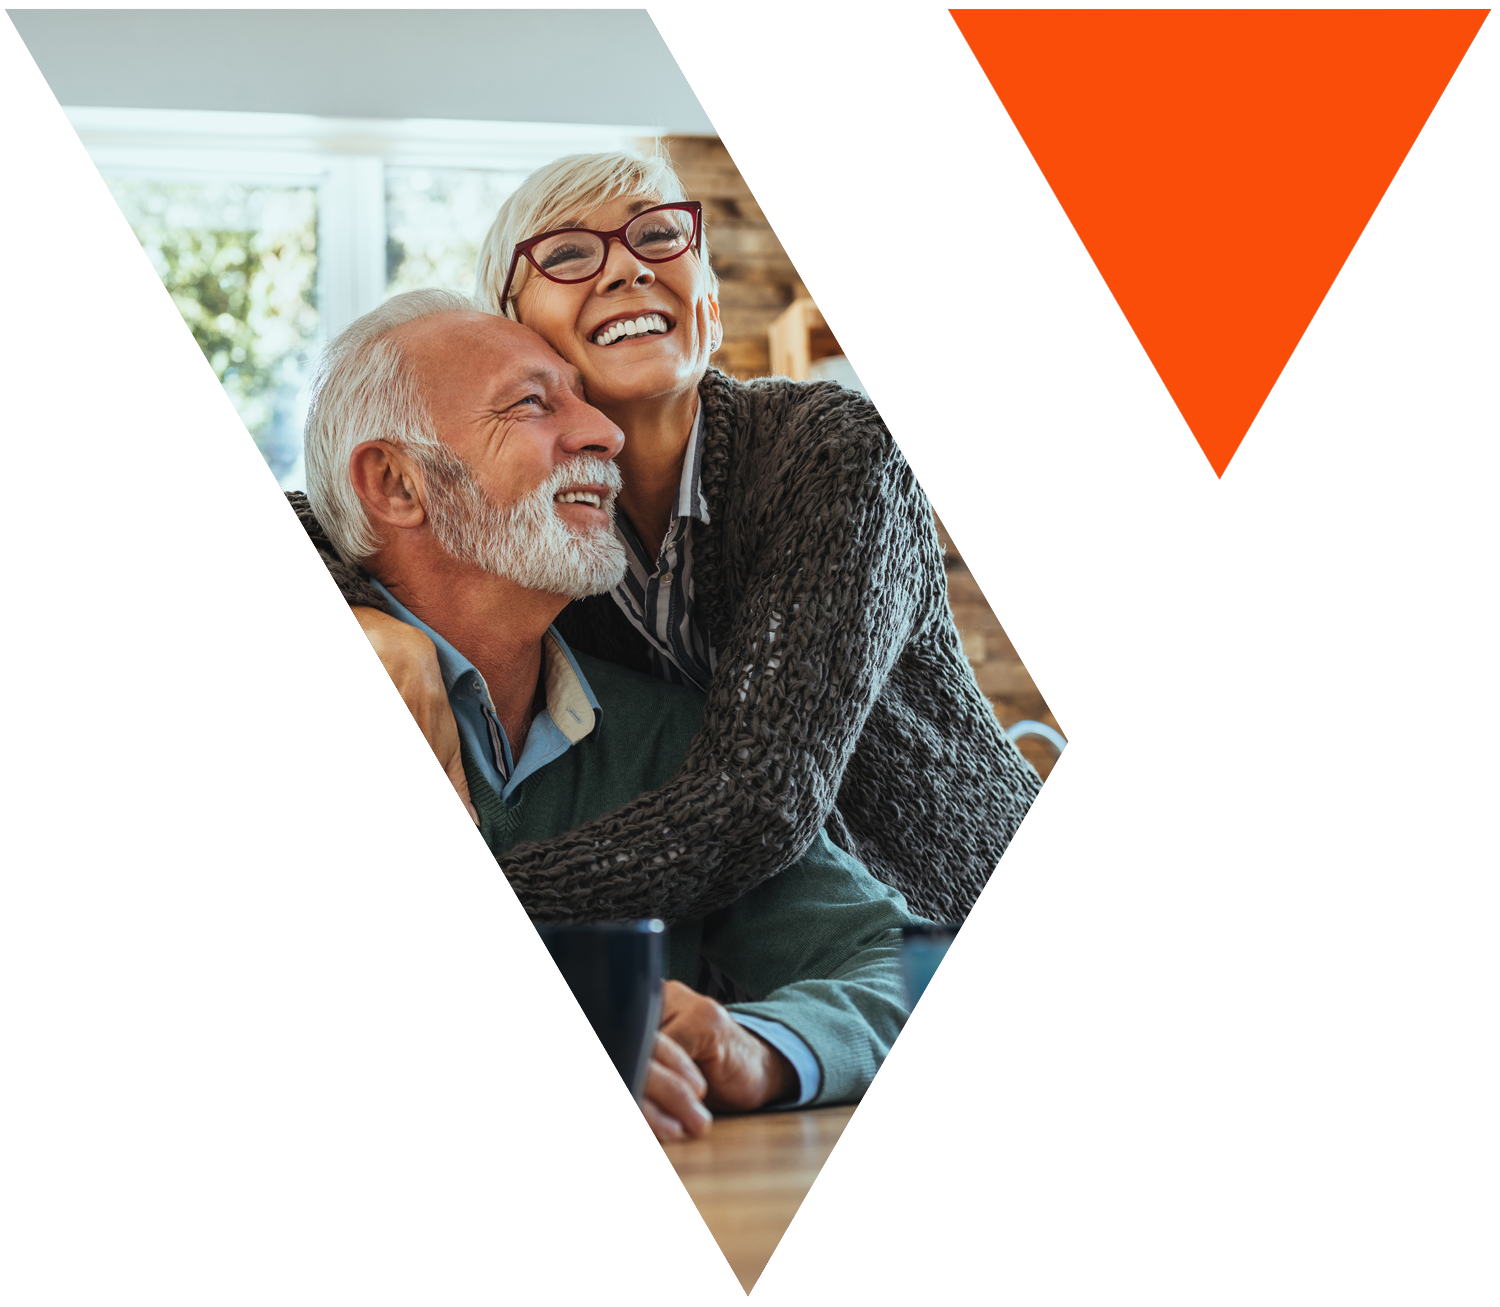 Older couple embraces in image shaped like the Vision Financial Group logo